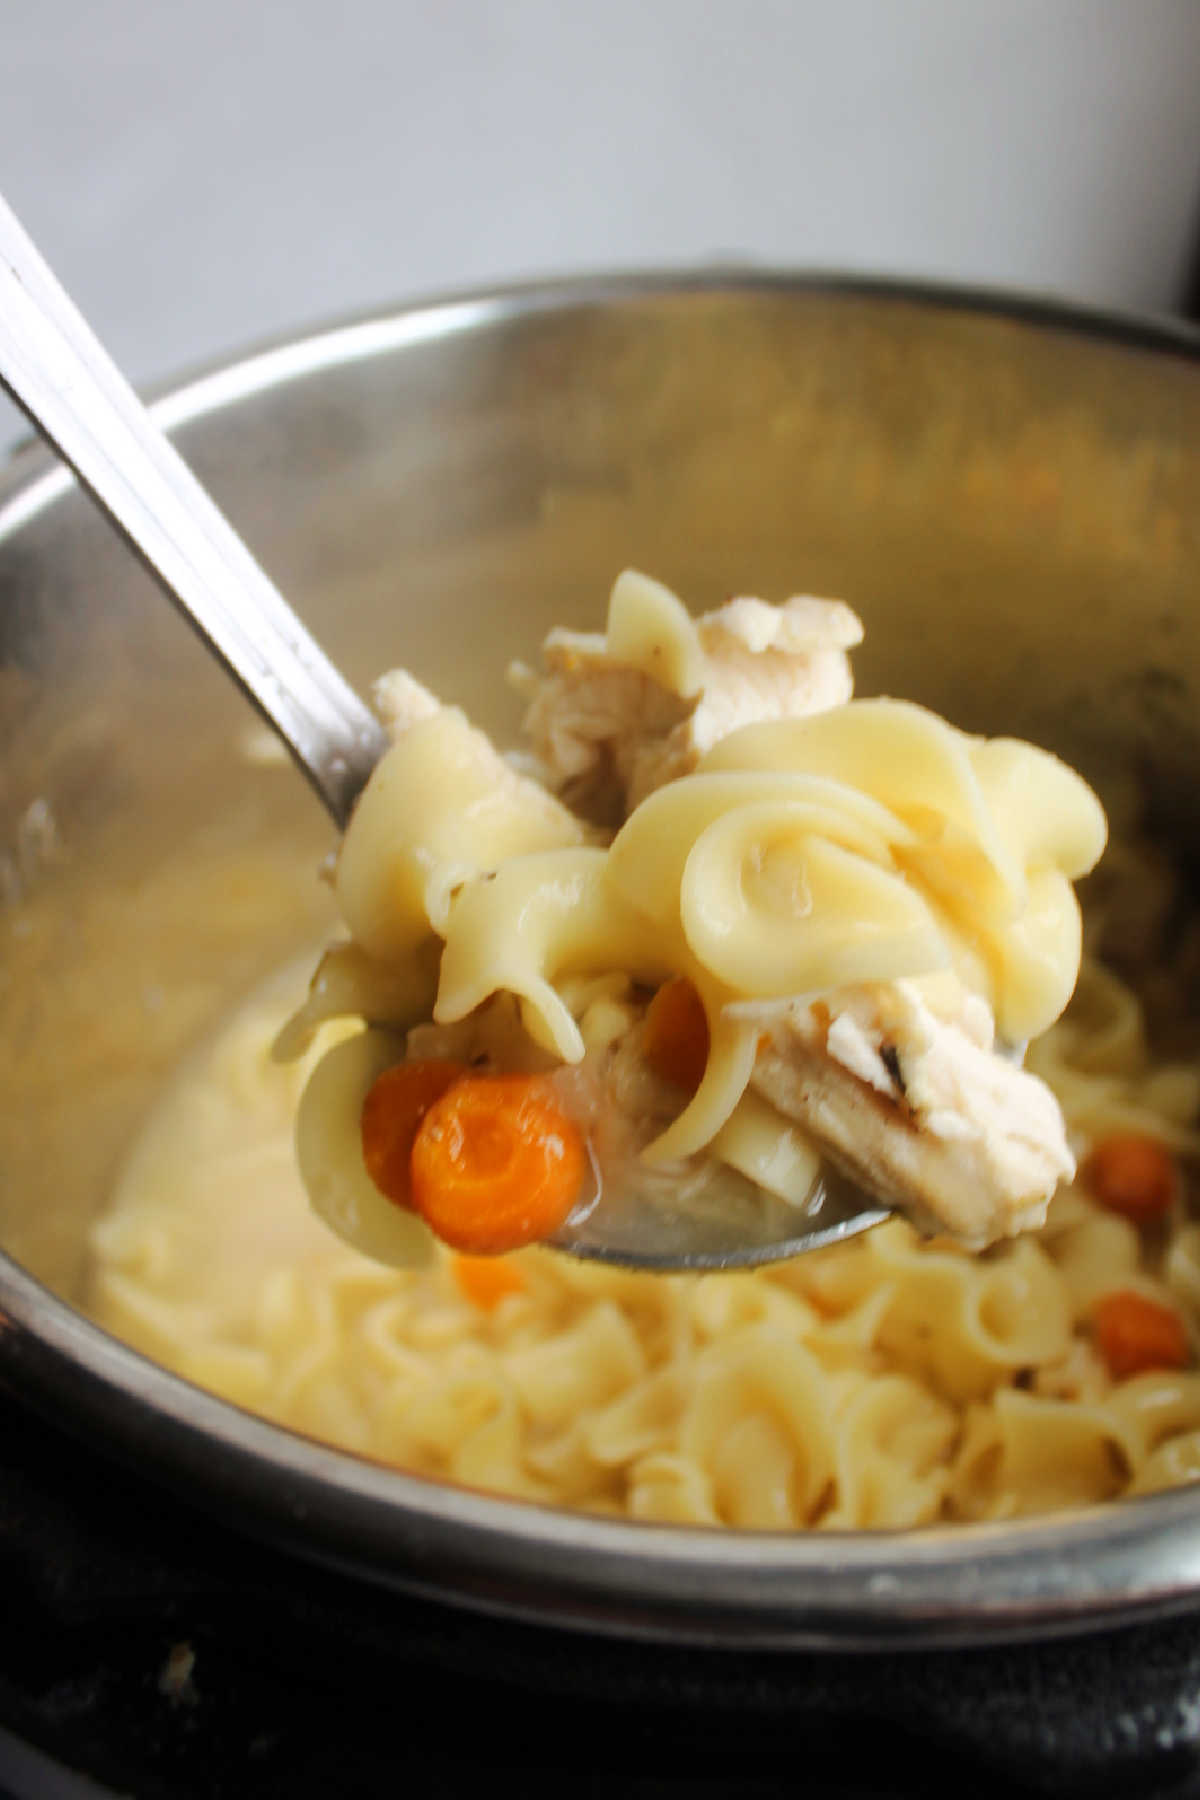 Ladle filled with homemade chicken noodle soup over pressure cooker.